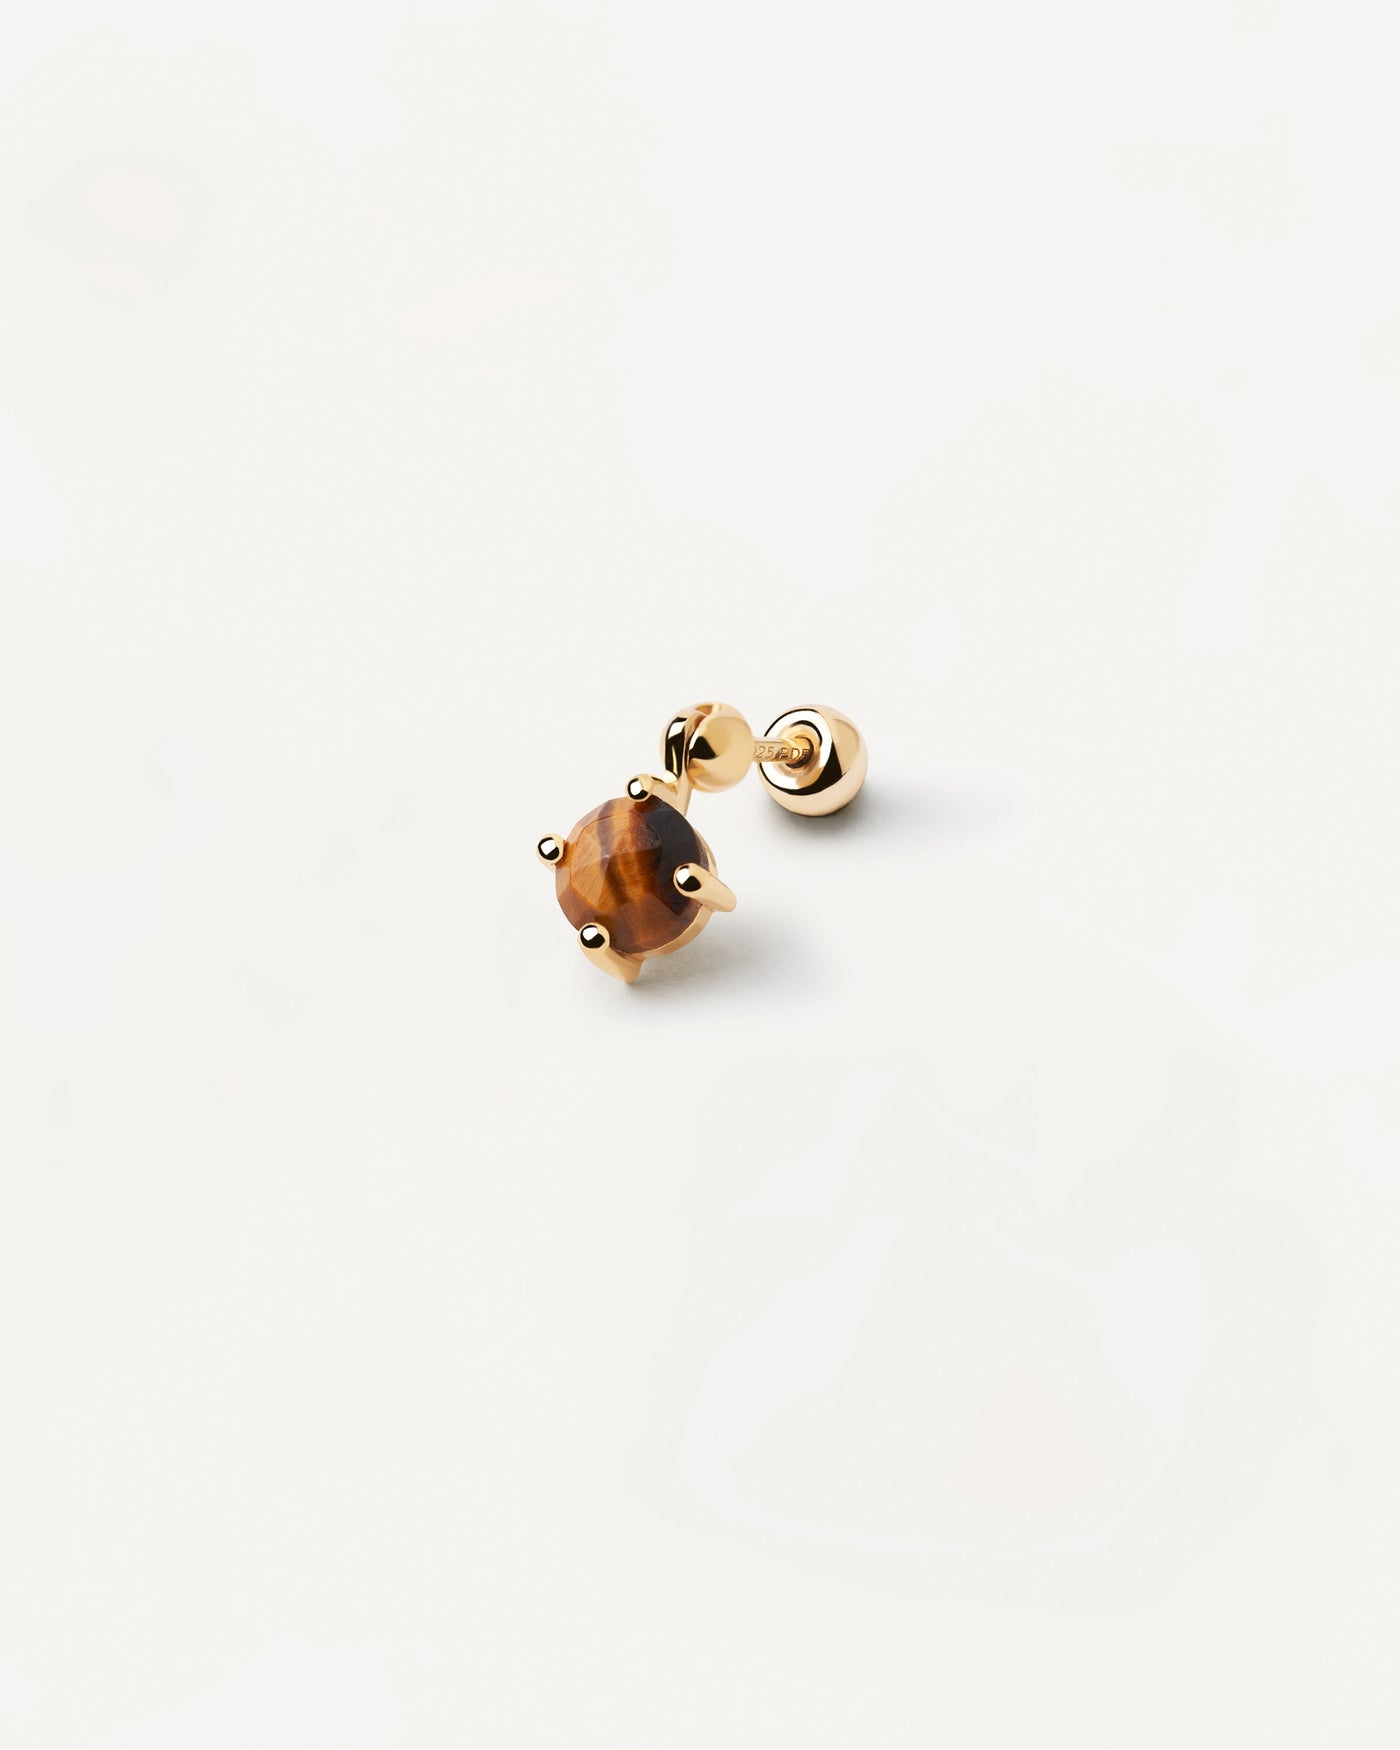 2023 Selection | Kimi Tiger Eye Single Earring. Gold-plated ear piercing with brown gemstone pendant in round cut. Get the latest arrival from PDPAOLA. Place your order safely and get this Best Seller. Free Shipping.